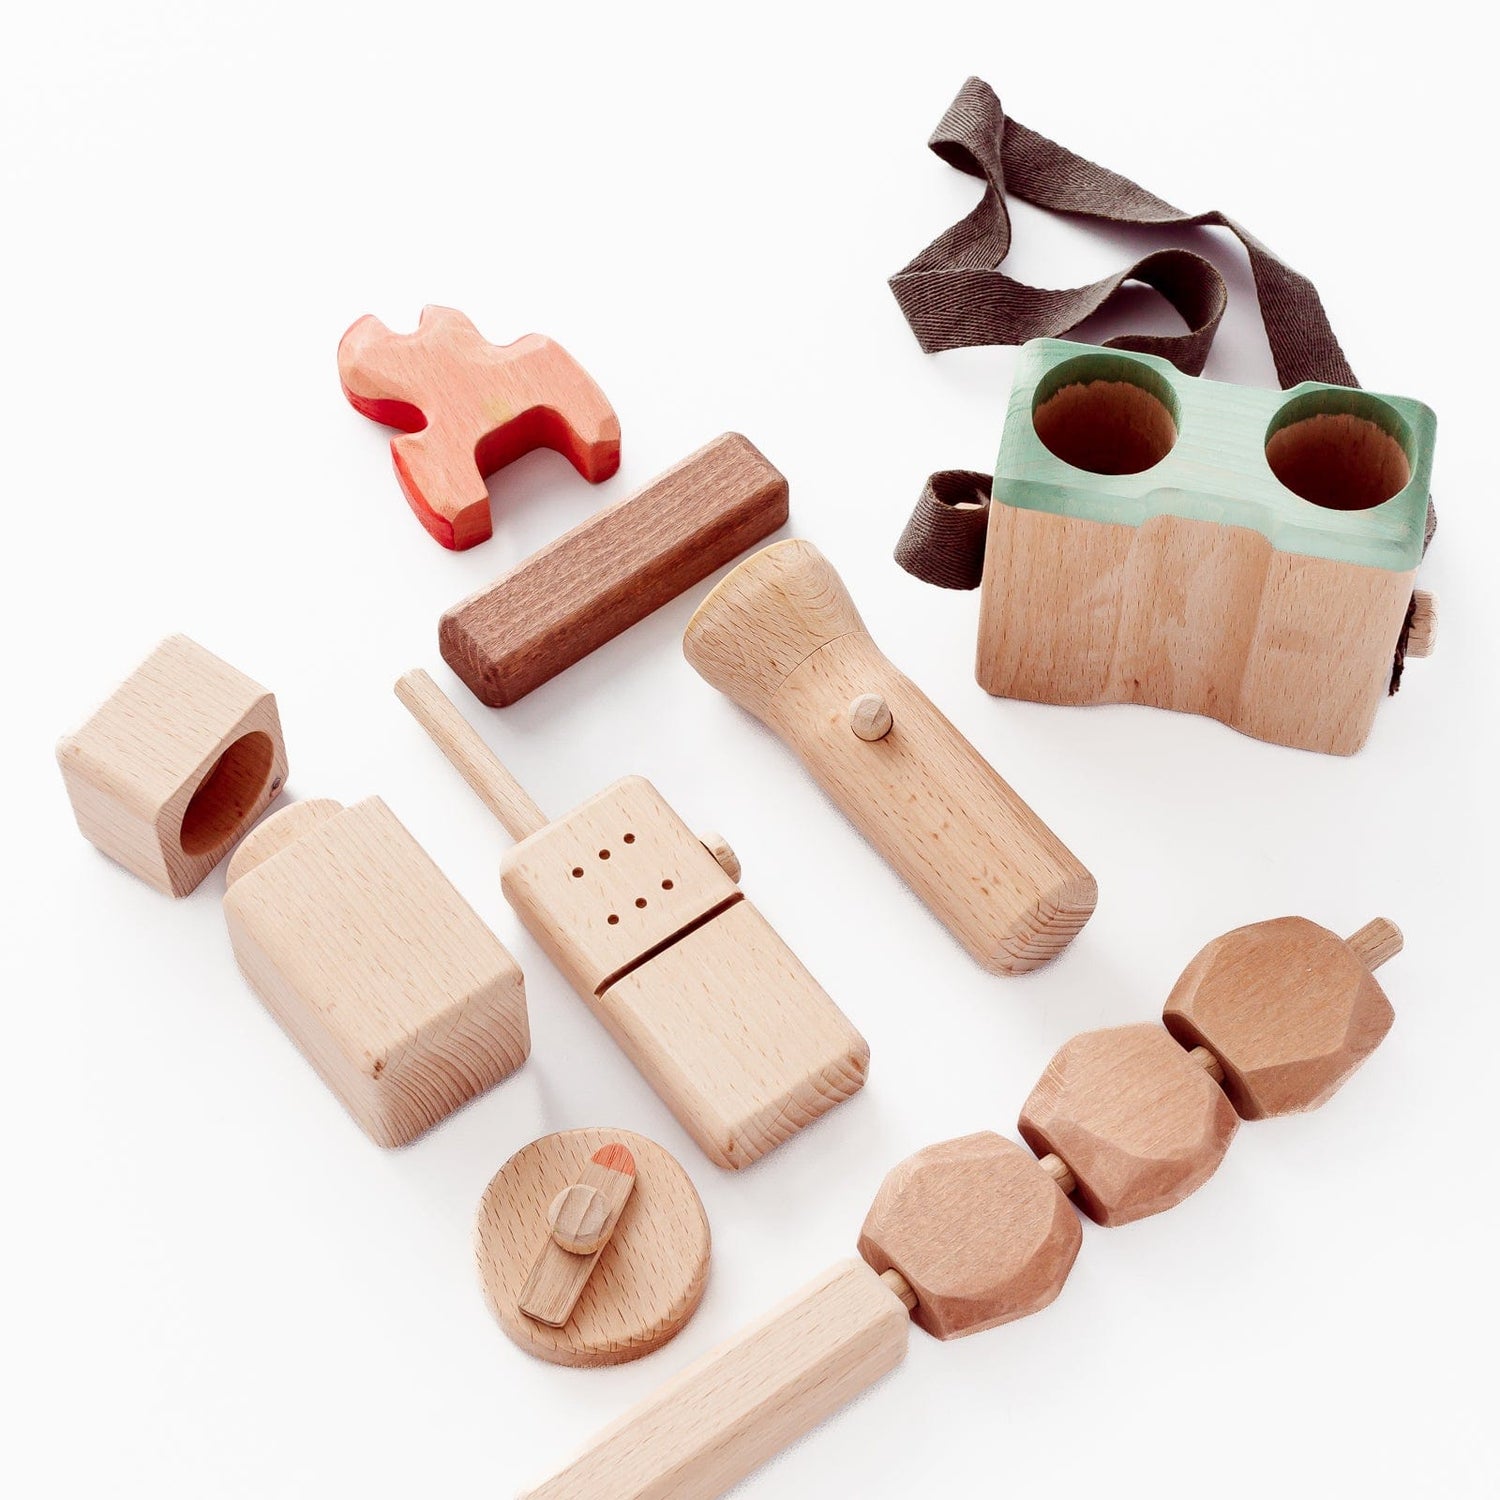 4OurBaby Wooden Toys Wooden Explorer & Play Camping Set